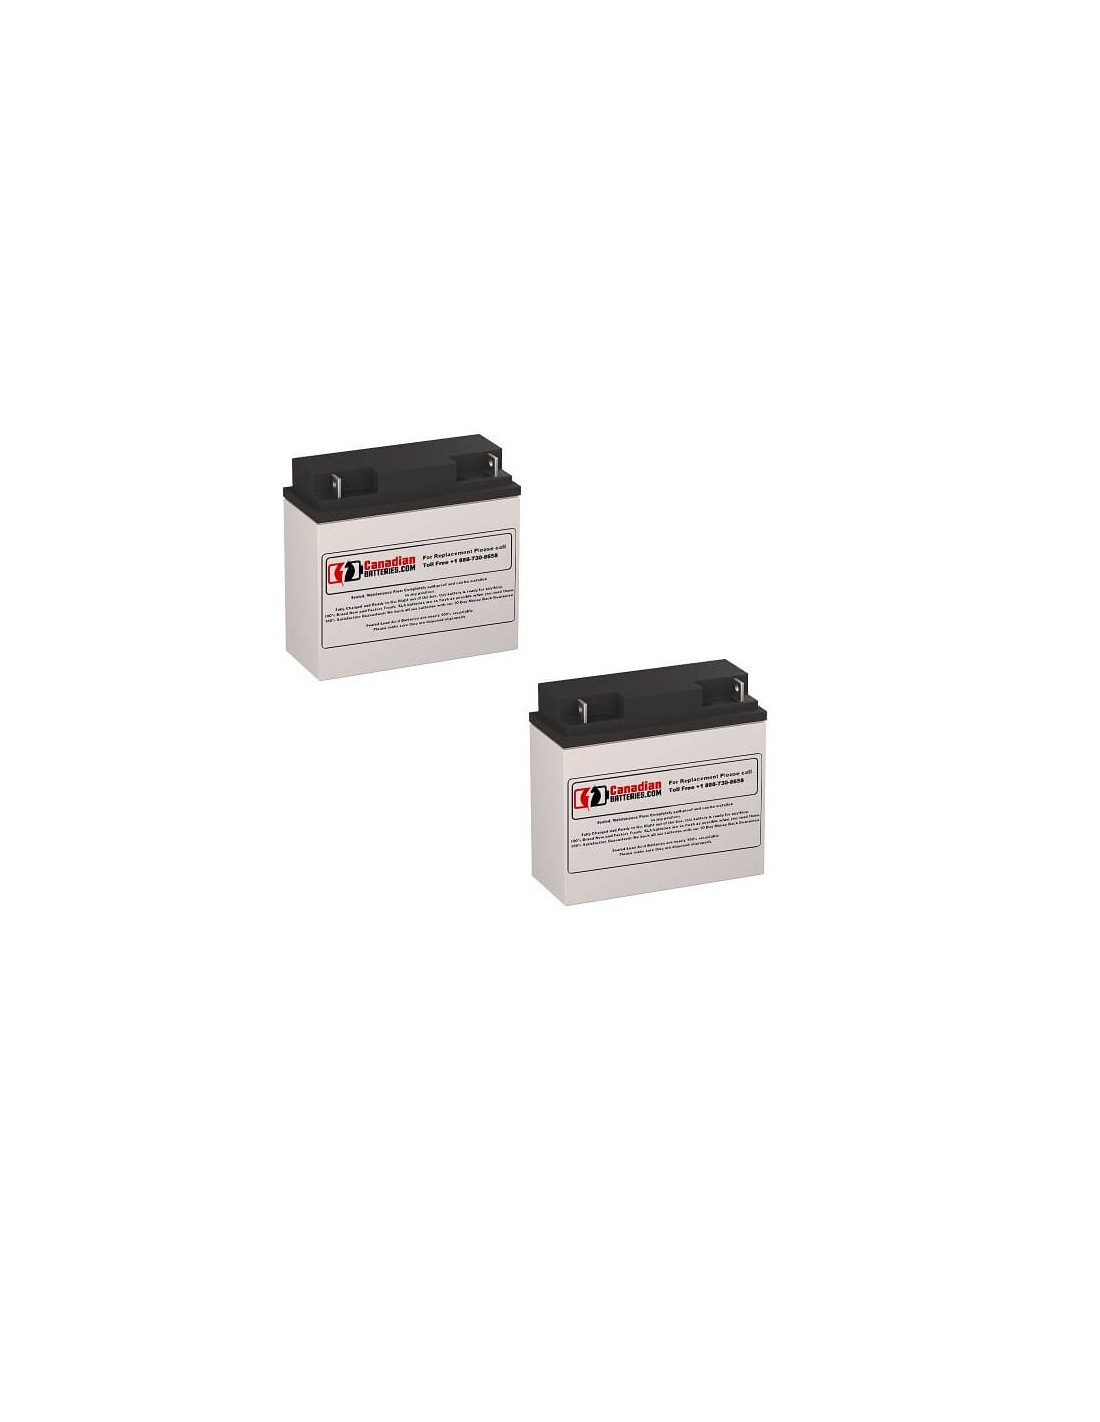 Batteries for Hp T1500h UPS, 2 x 12V, 18Ah - 216Wh